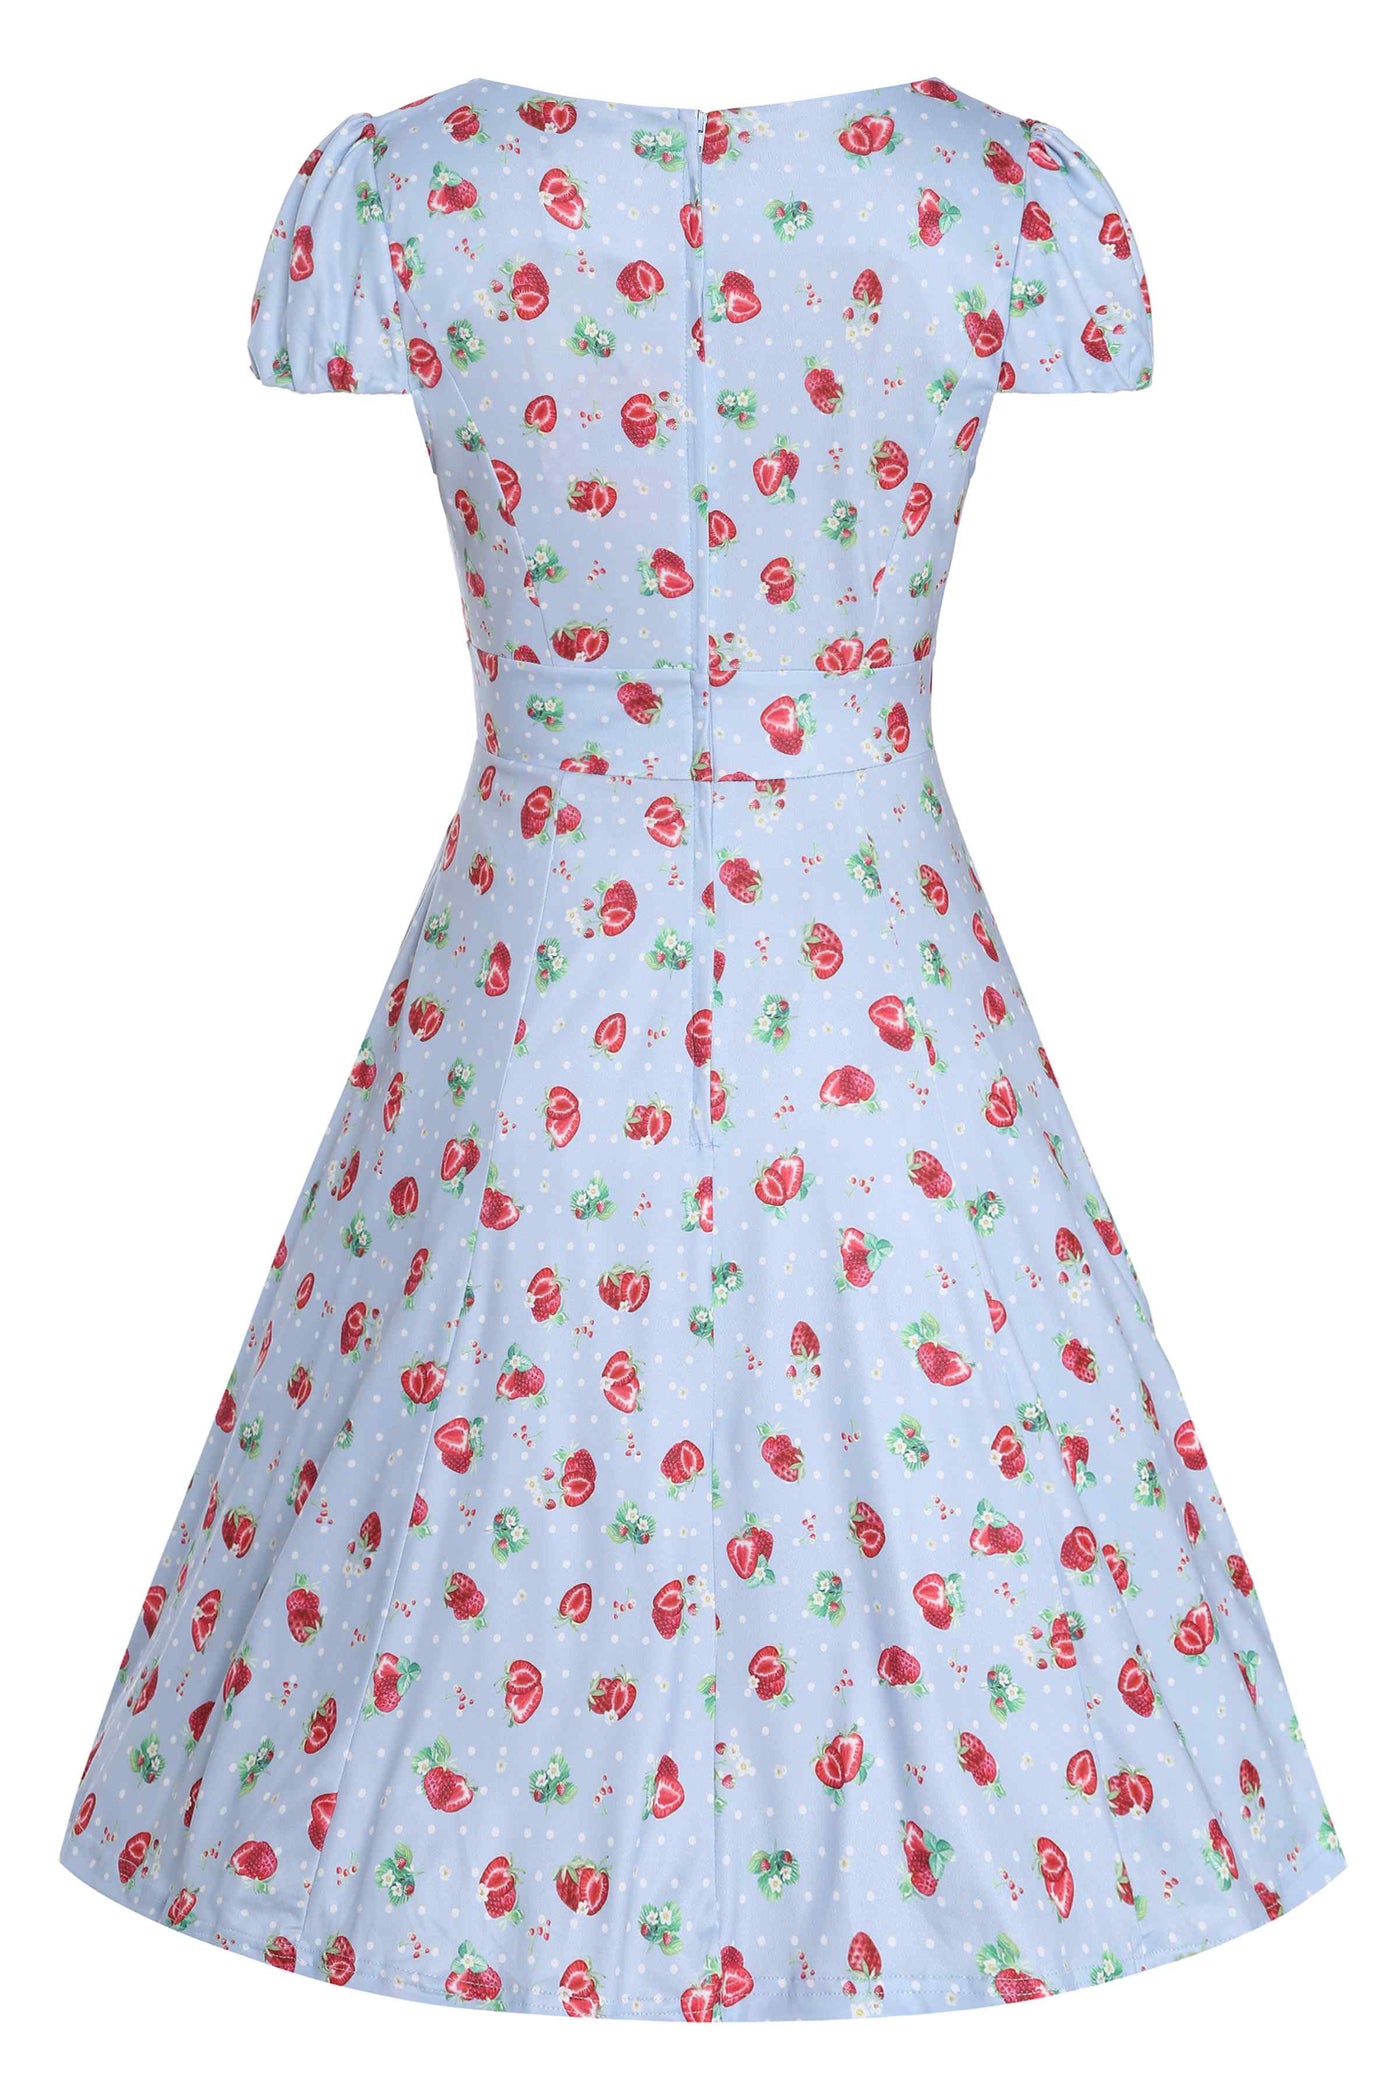 Back View of Strawberry and Polka Dot Swing Dress in Baby Blue